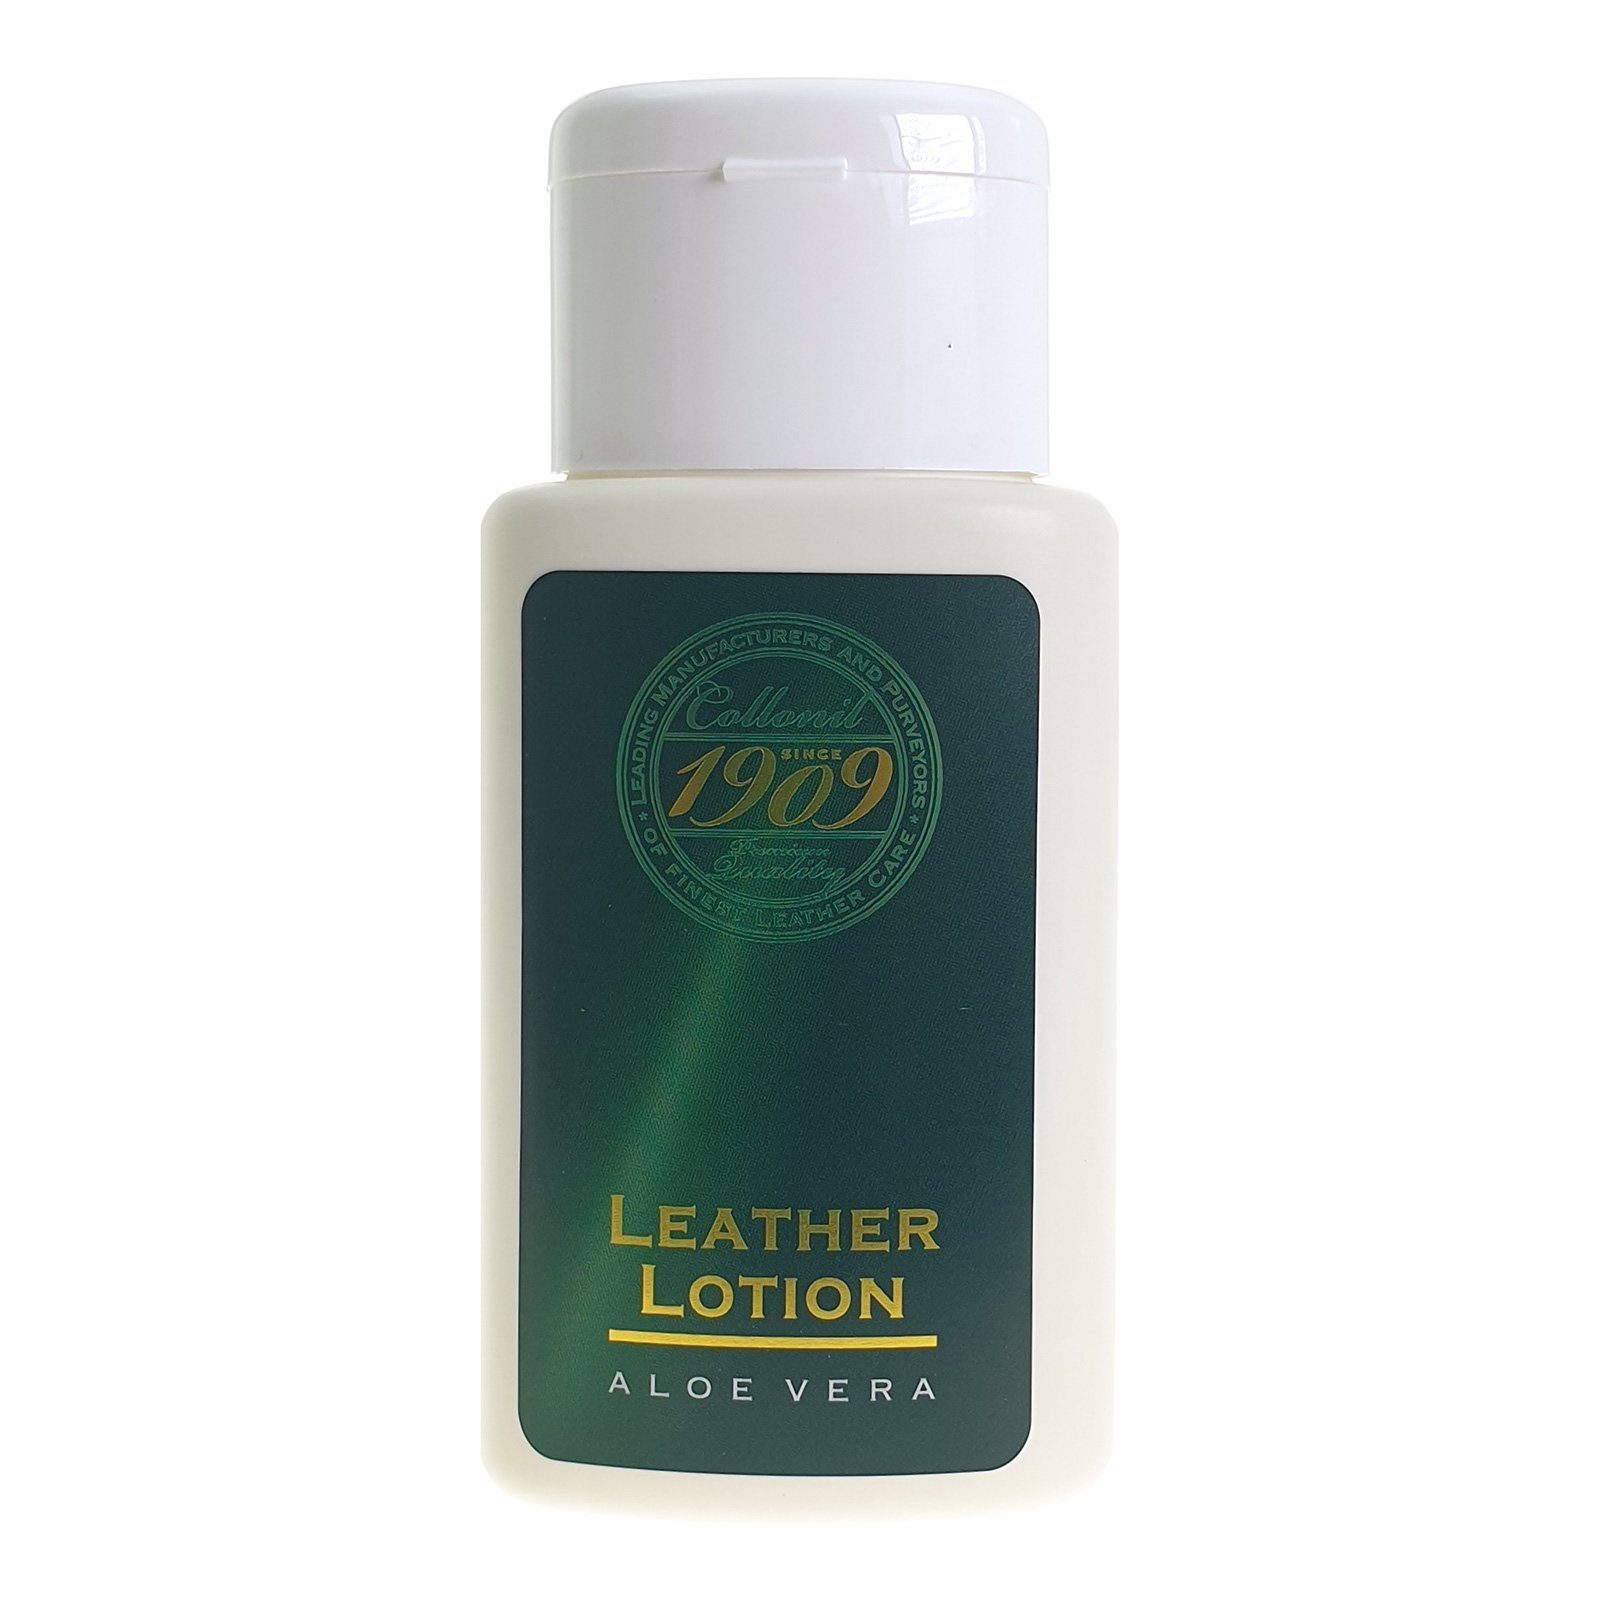 Collonil Collonil 1909 Leather Lotion 100ml - neue Verpackung! Schuhcreme